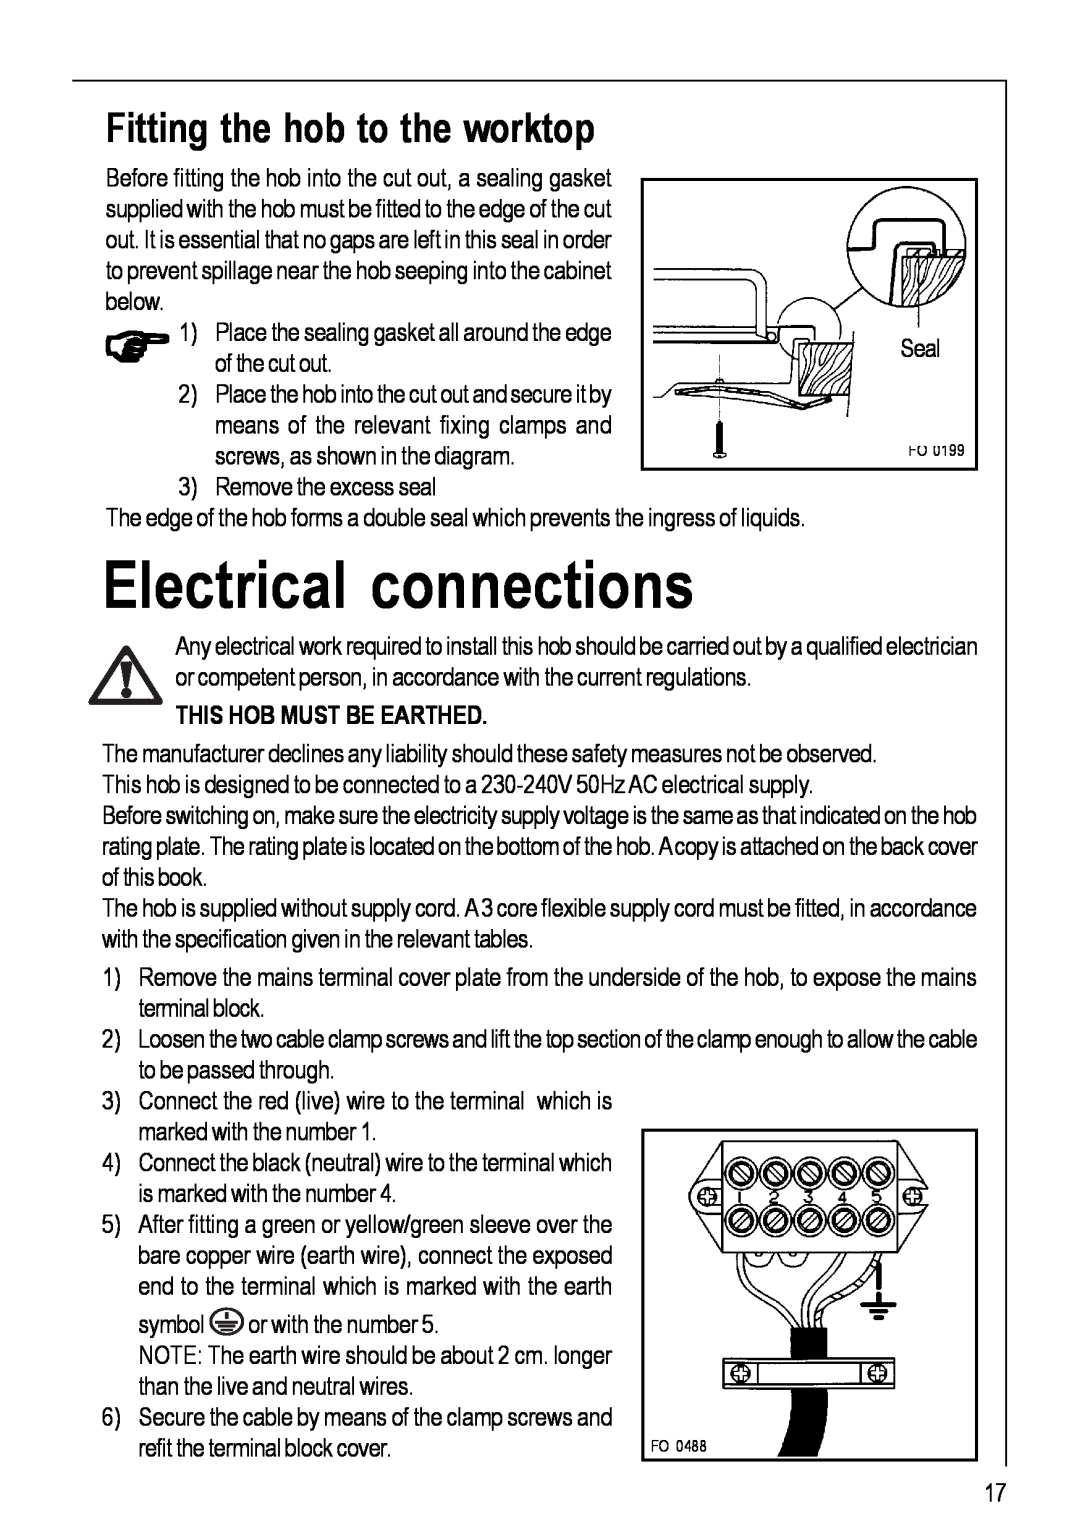 Electrolux 116 K operating instructions Electrical connections, Fitting the hob to the worktop 